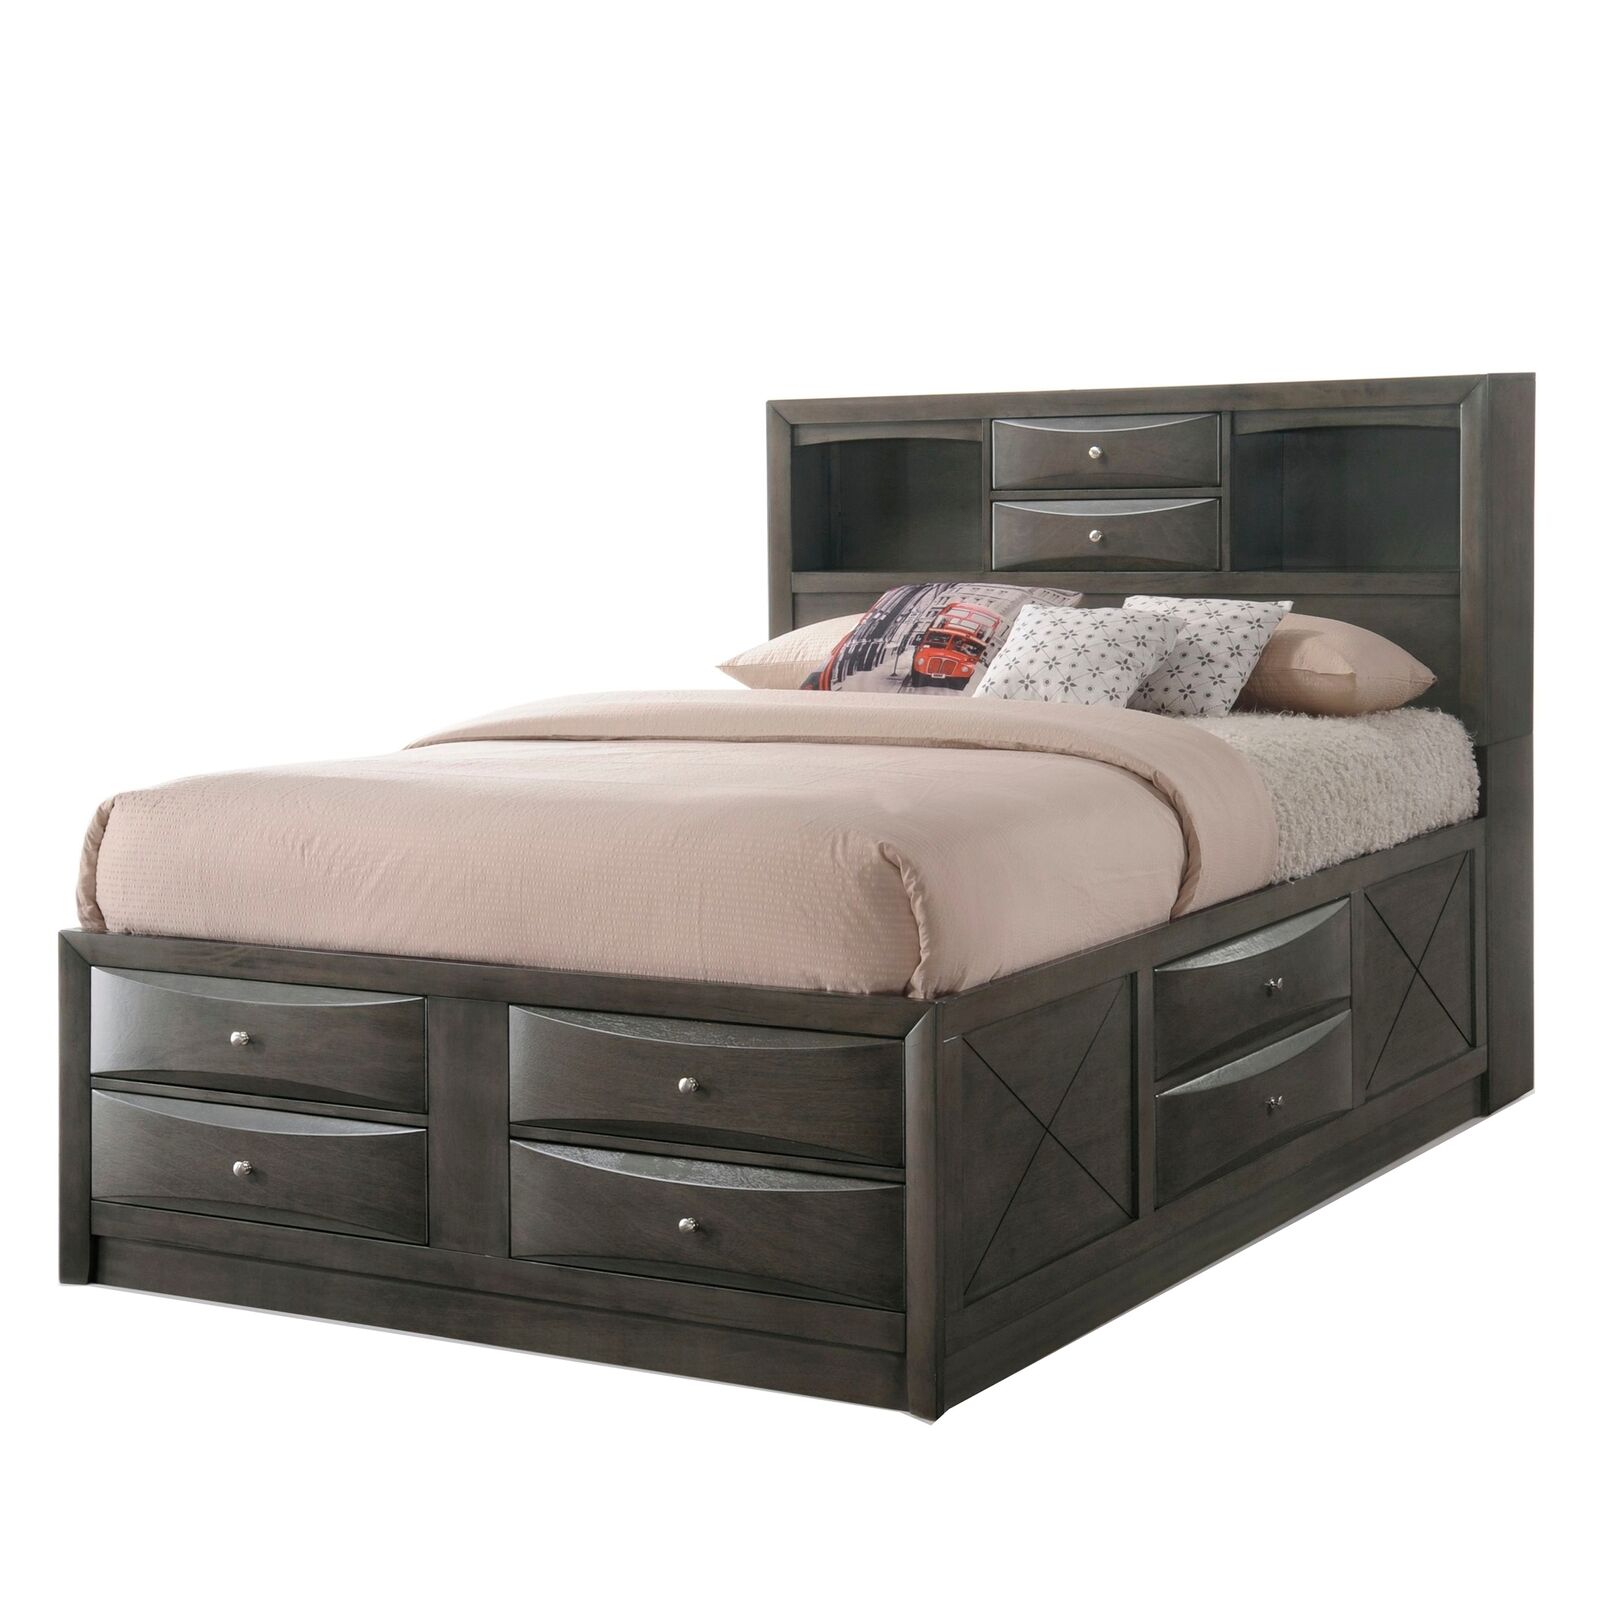 Panel Design Full Size Bed with Bookcase and Drawers, Taupe Brown Full